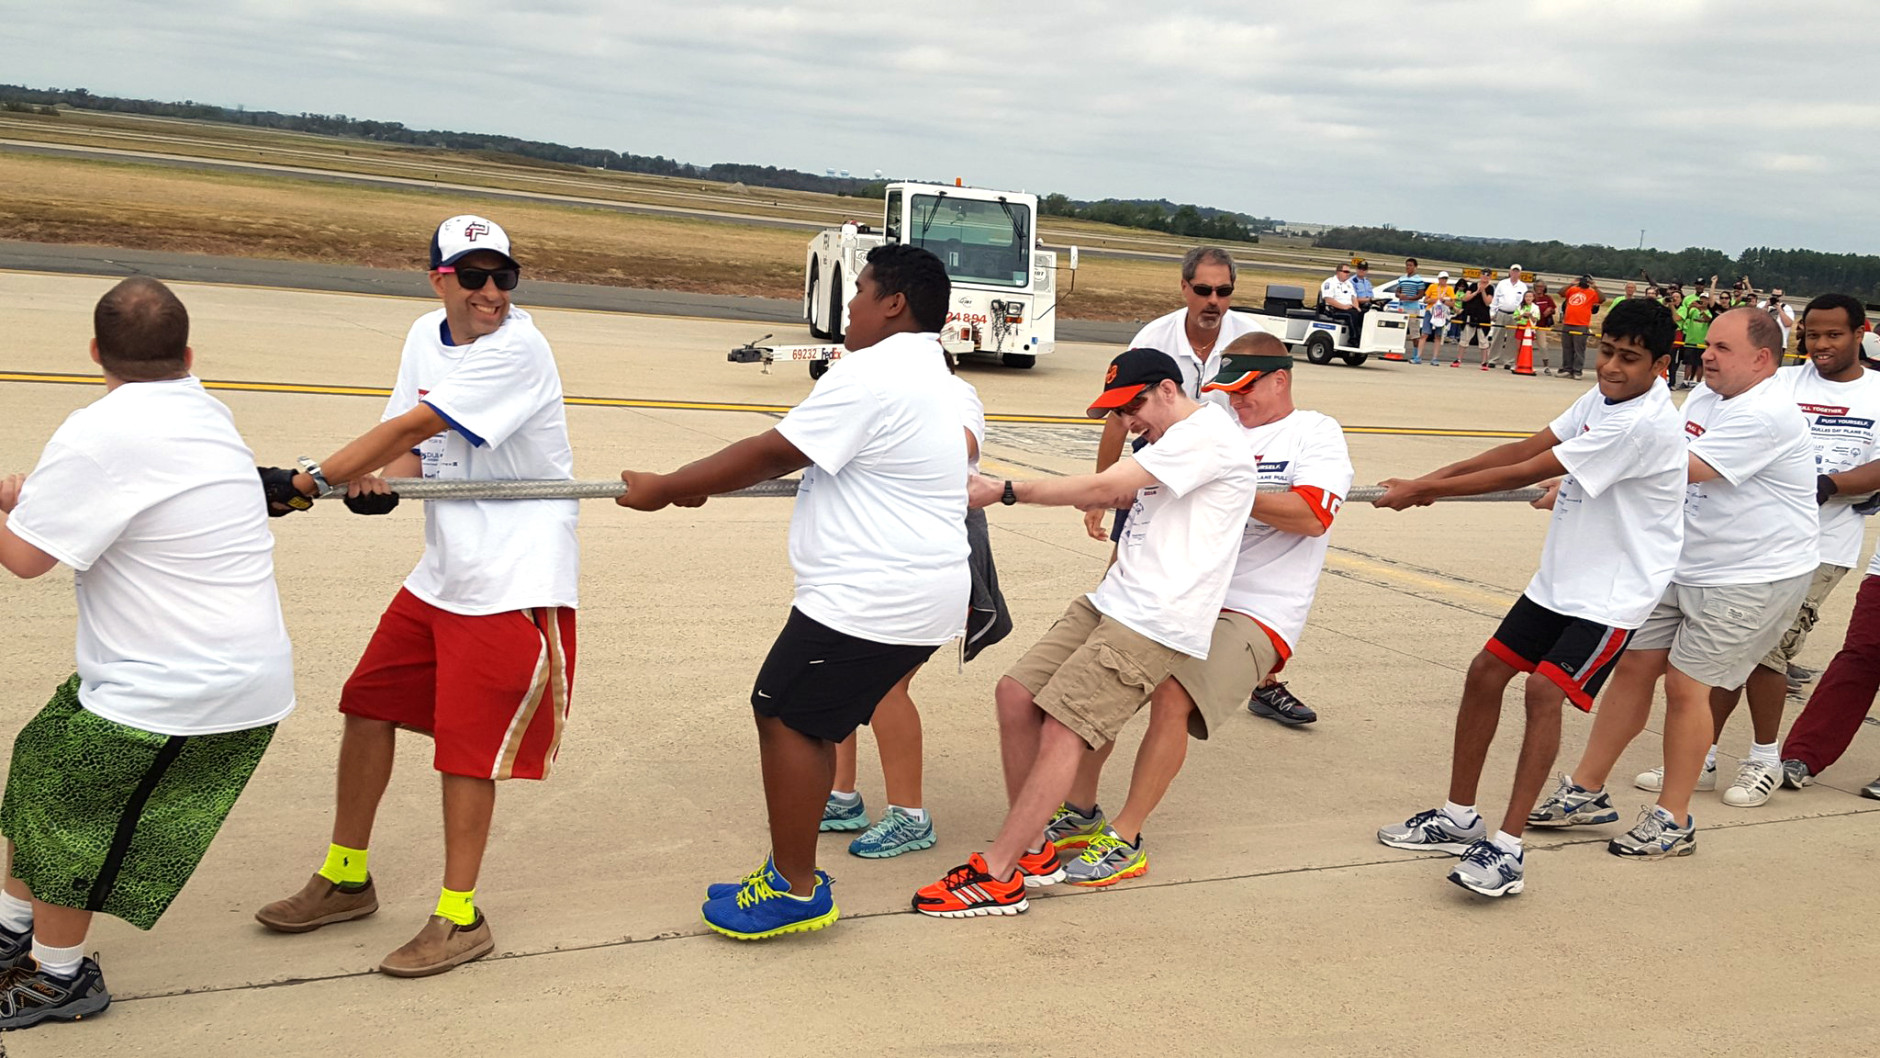 It was all tug, no war, as the Special Olympics team pulls 80 tons of plane 12 feet in just 14 seconds on Saturday, Sept. 17, 2016. (WTOP/Ralph Fox)